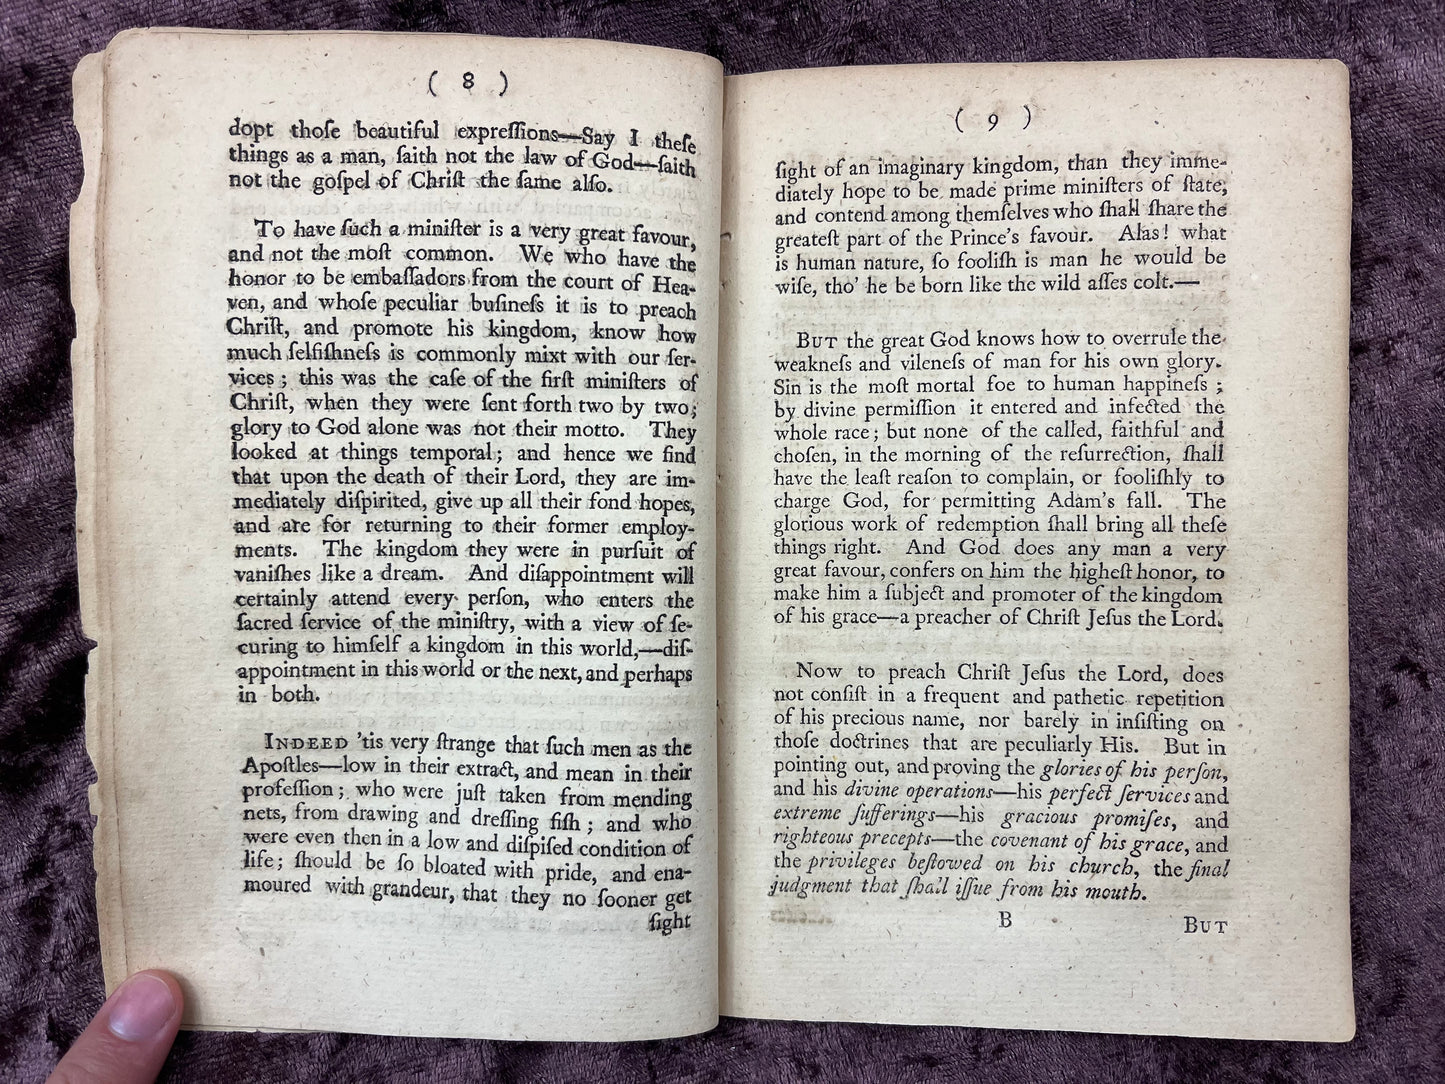 1761 Octavo First Edition Pamphlet Sermon Preached At The Ordination Of Reverend Mr. Eliab Stone To The Pastoral Care Of The Second Church By Matthew Bridge-The Reverend Who Resembled George Washington